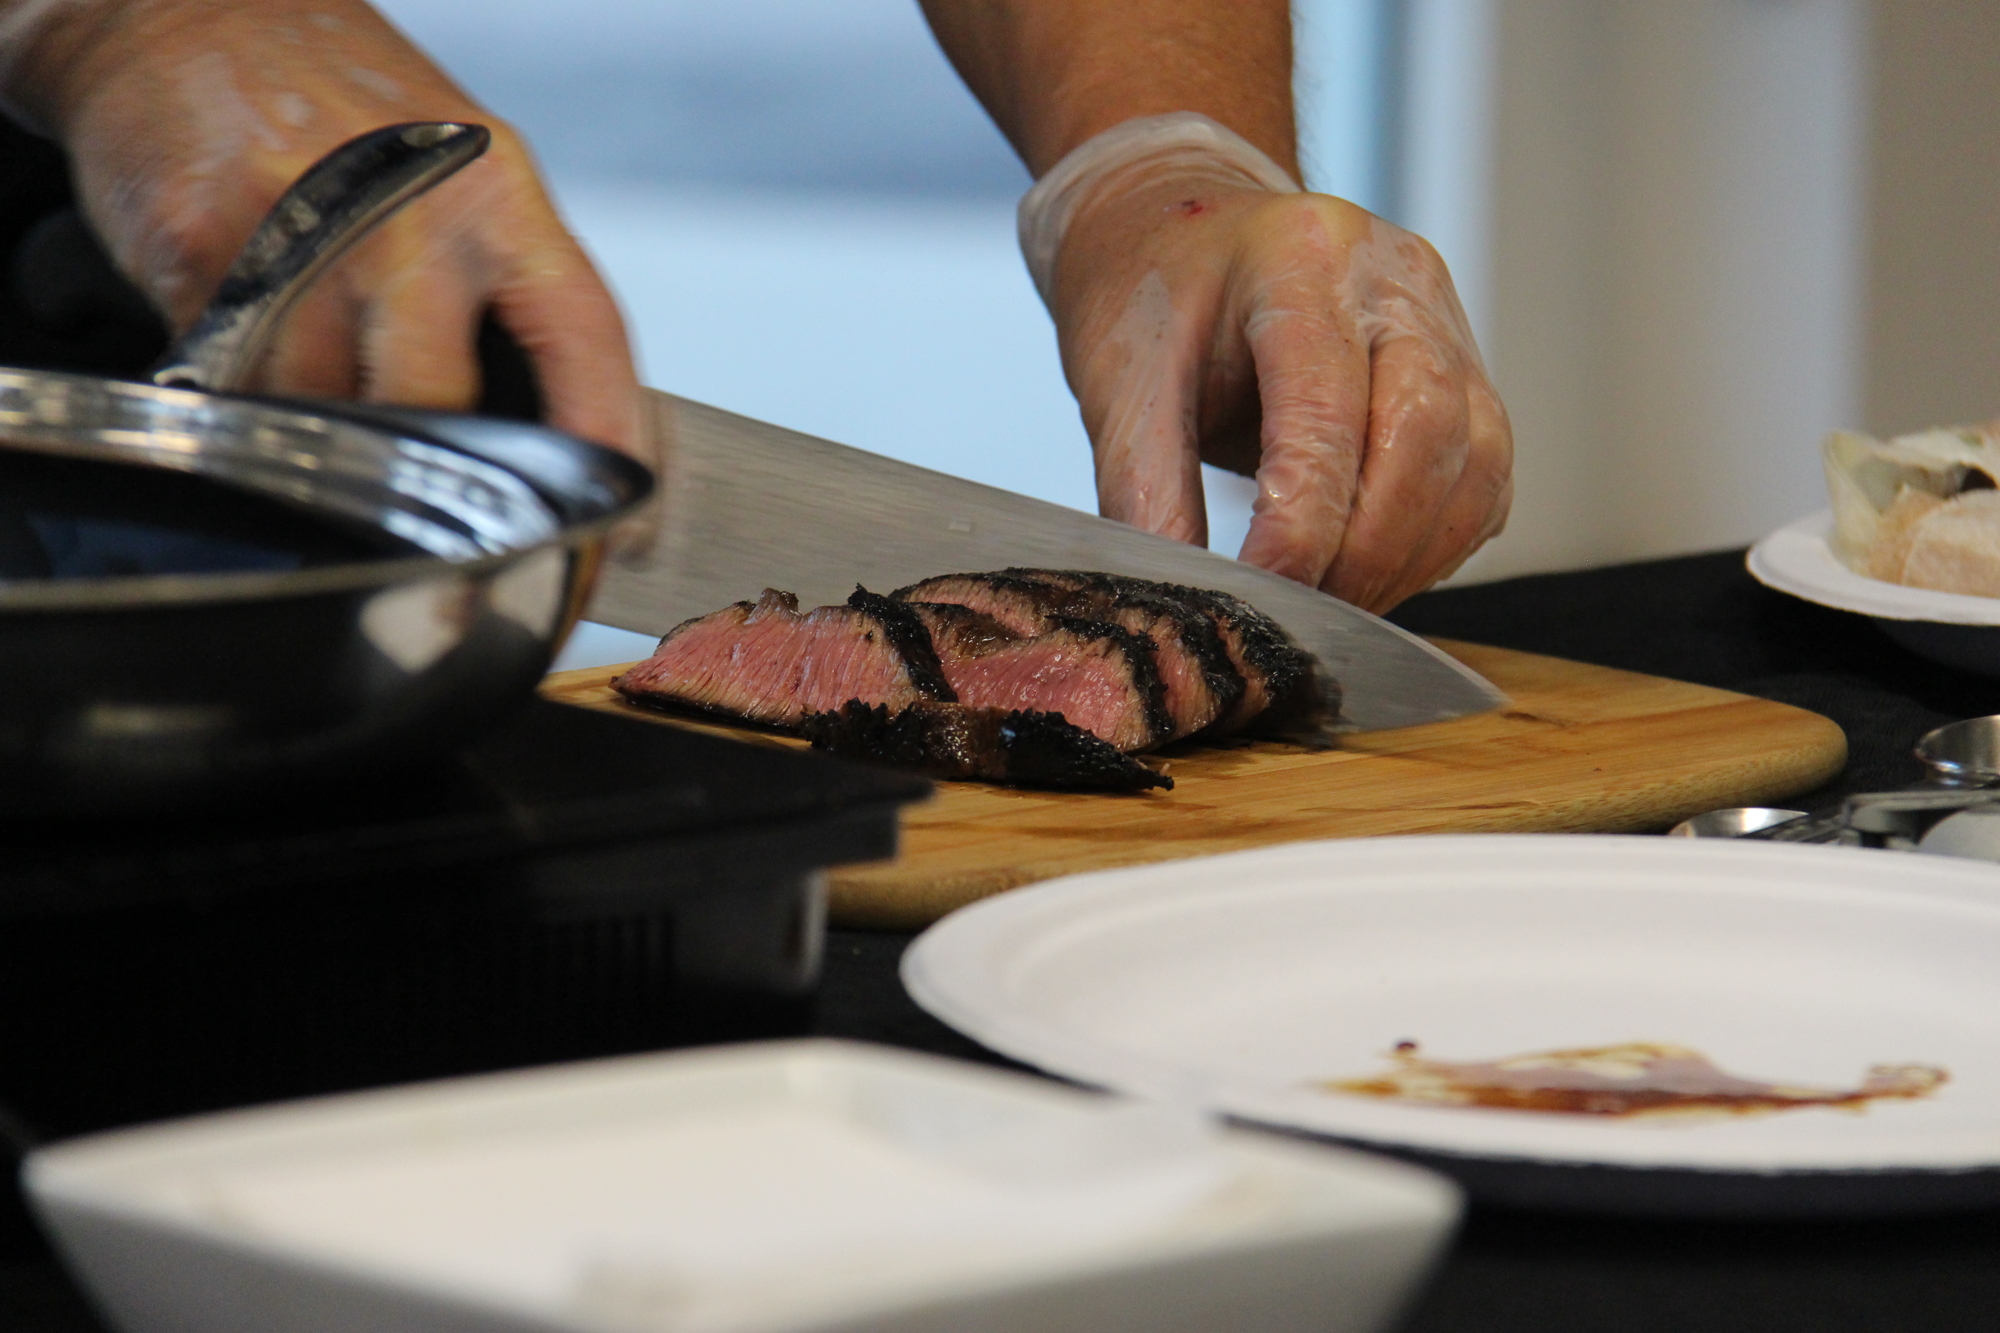 Chef Warren Caterson plated a medium-rare steak after giving a live cooking demonstration.